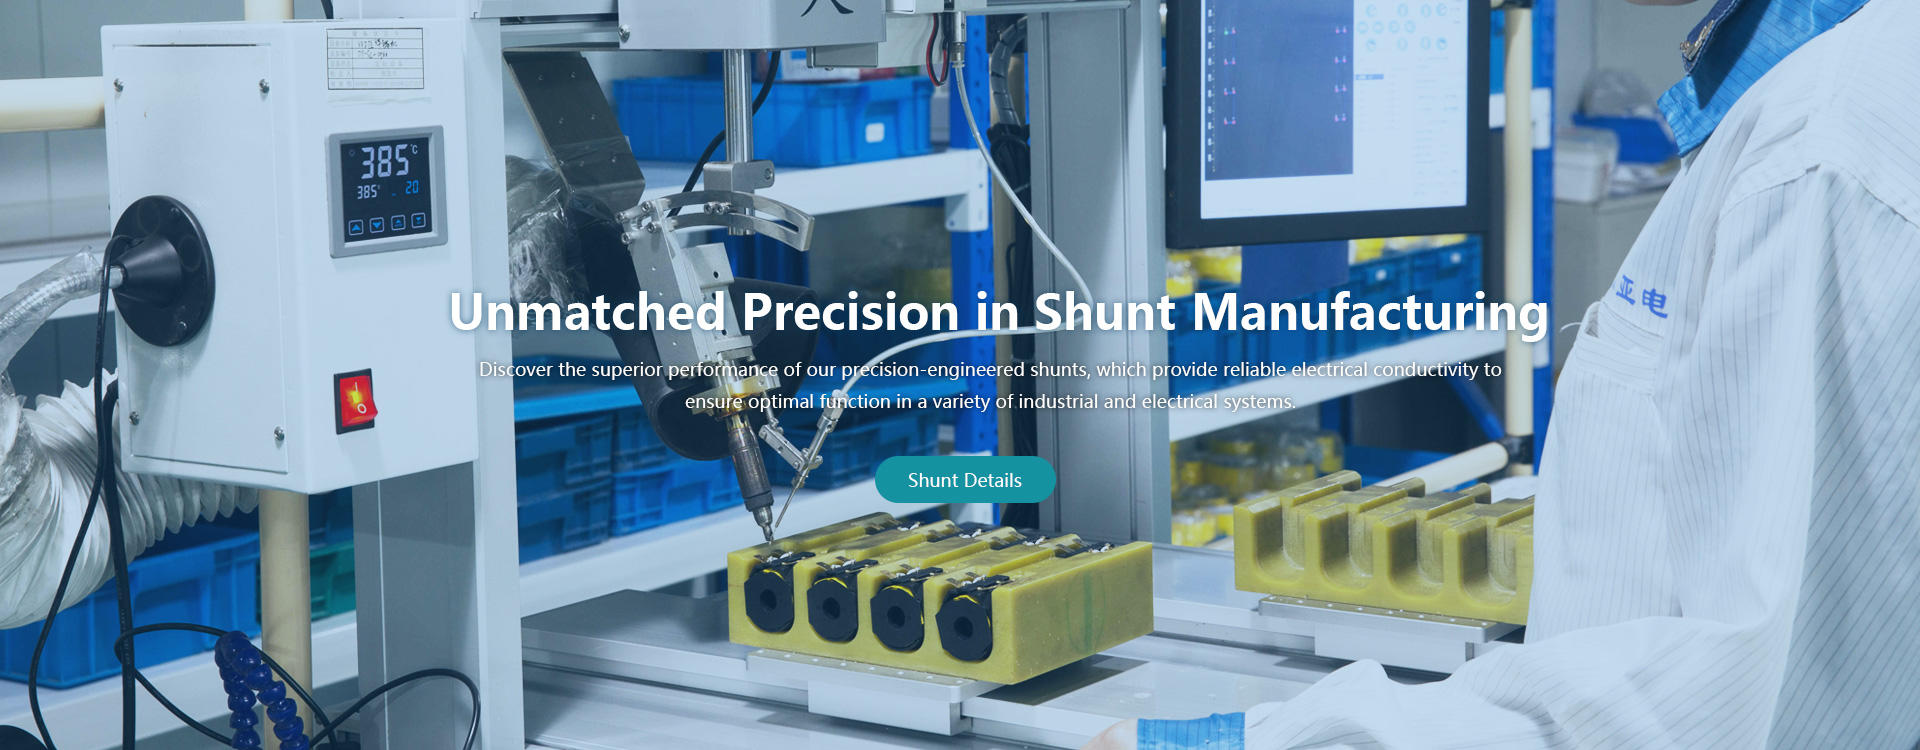 Unmatched Precision in Shunt Manufacturing